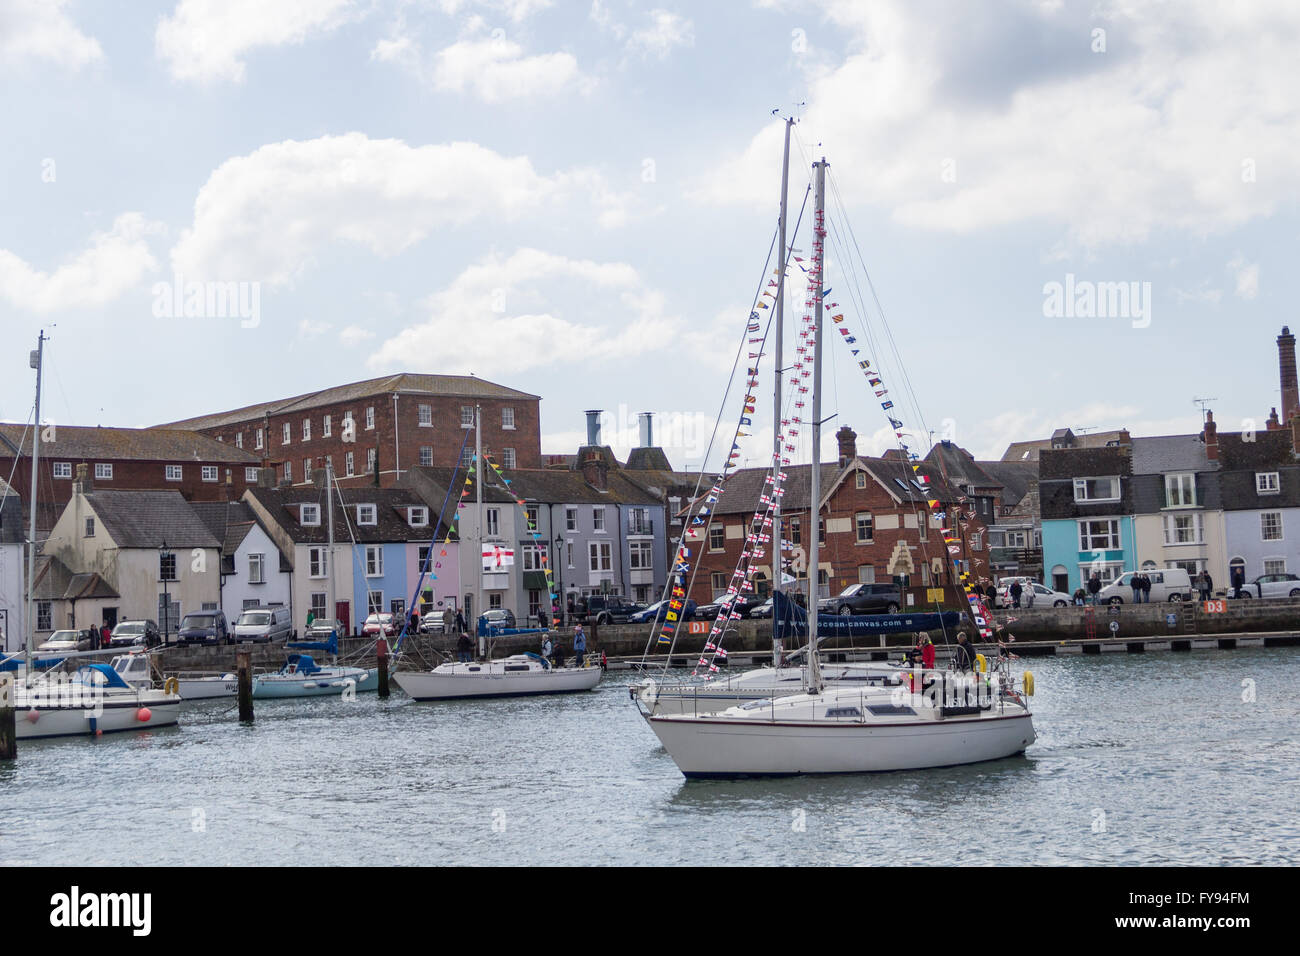 Weymouth, England. 23 April 2016. Queen's 90th Birthday Floating Tribute. Just a Drifter returning. Credit:  Frances Underwood/Alamy Live News Stock Photo